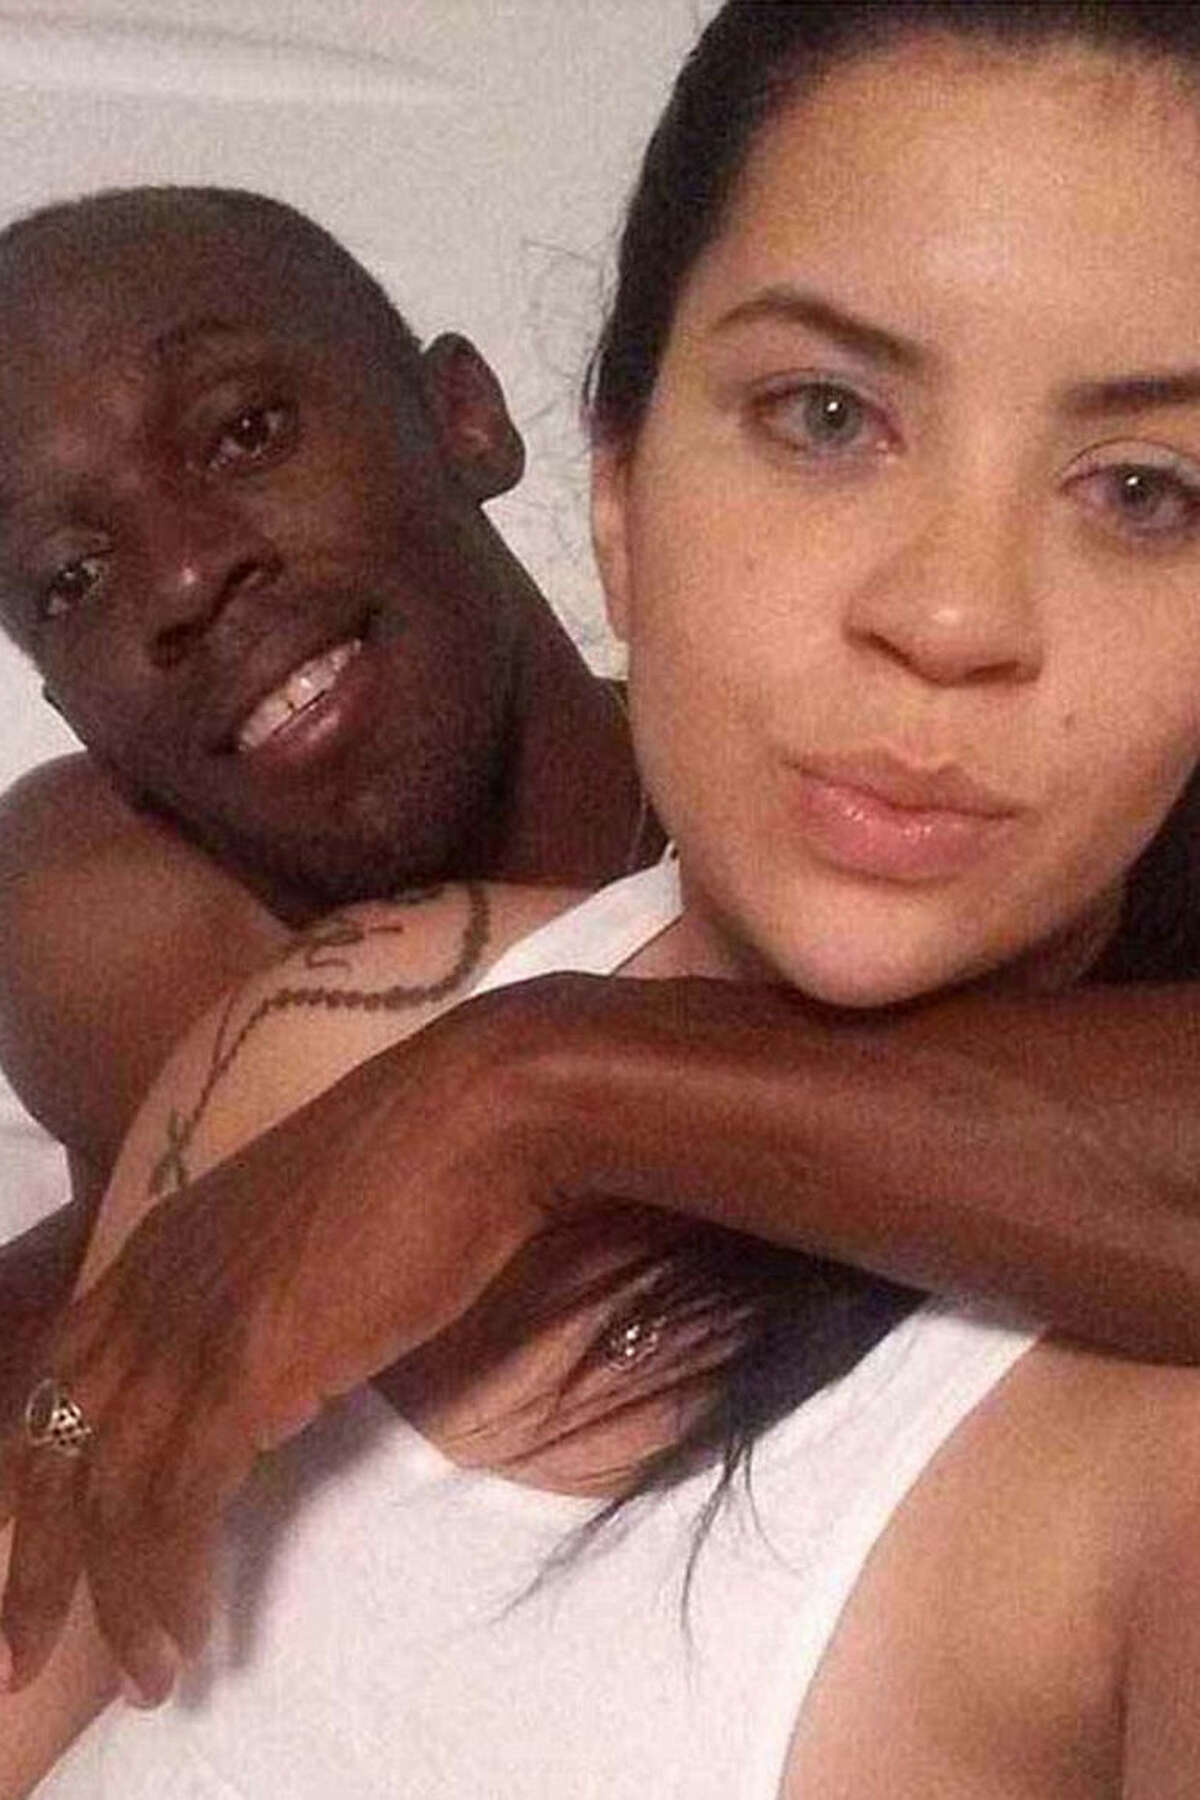 Usain Bolts Girlfriend Throws Shade At Bolt In The Most Passive Way Ever